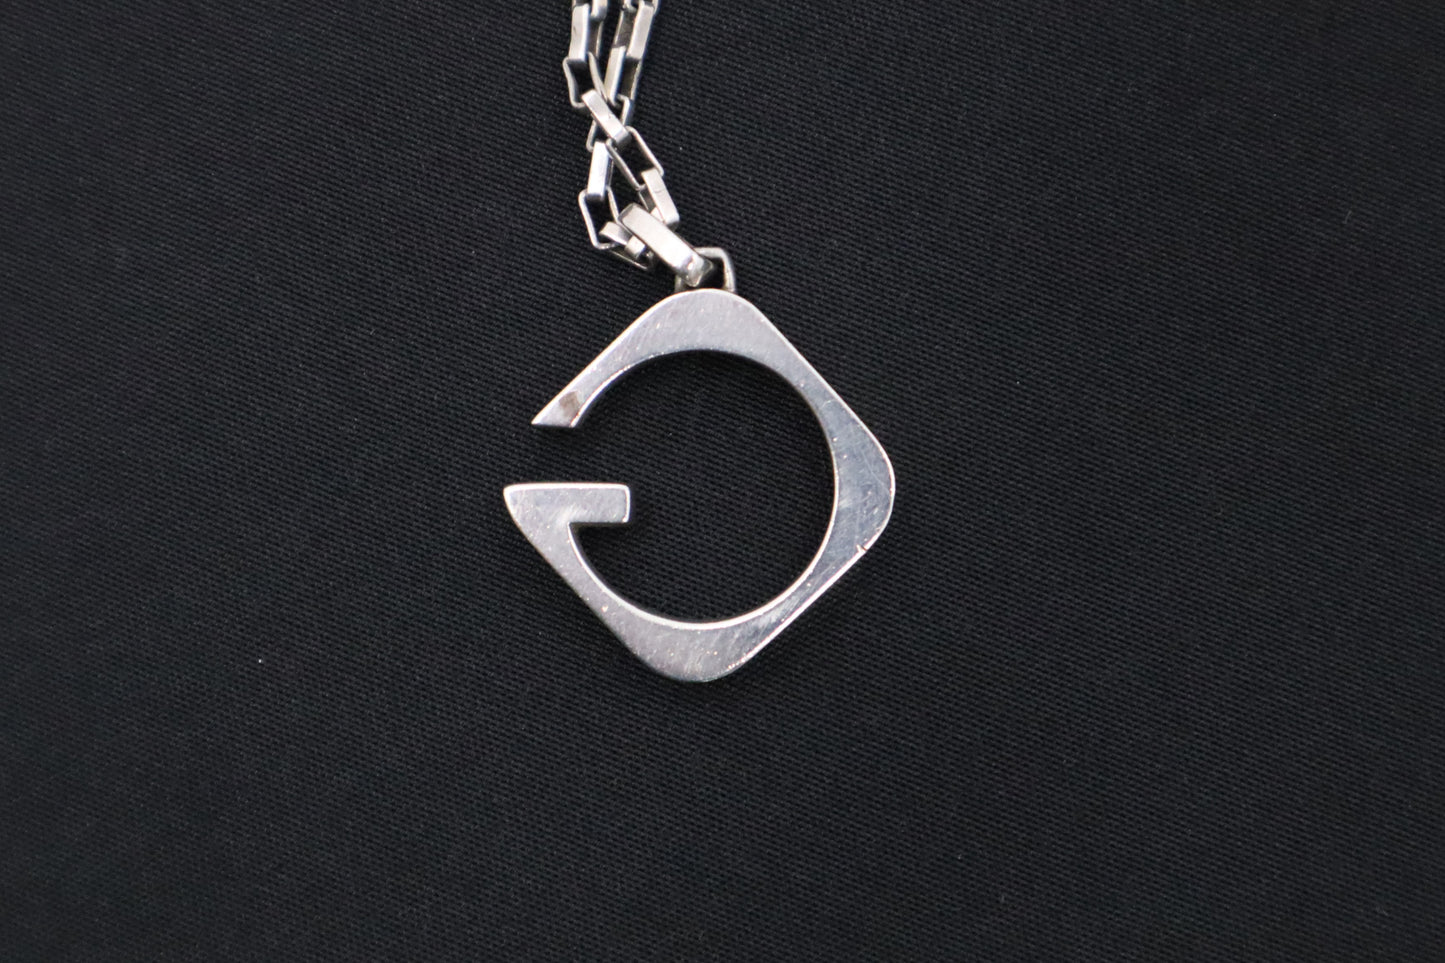 Gucci "G" Necklace in Sterling Silver